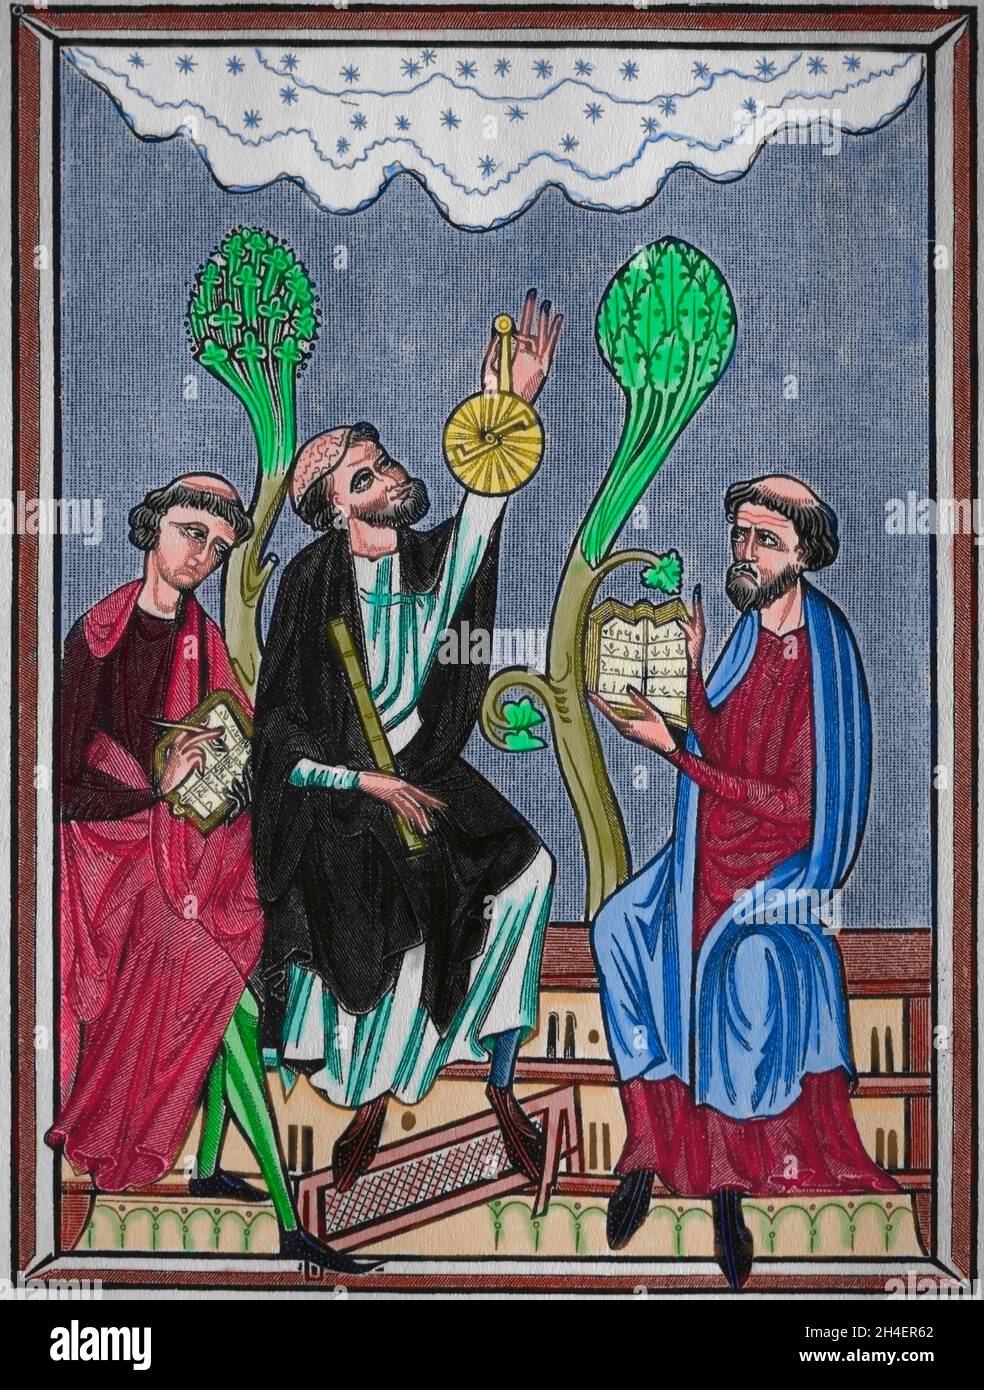 Astronomy lesson. The figure in the centre is using an astrolabe. Engraving, 19th century, afther a miniature from Braviary of St. Luis, 13th centry. Stock Photo